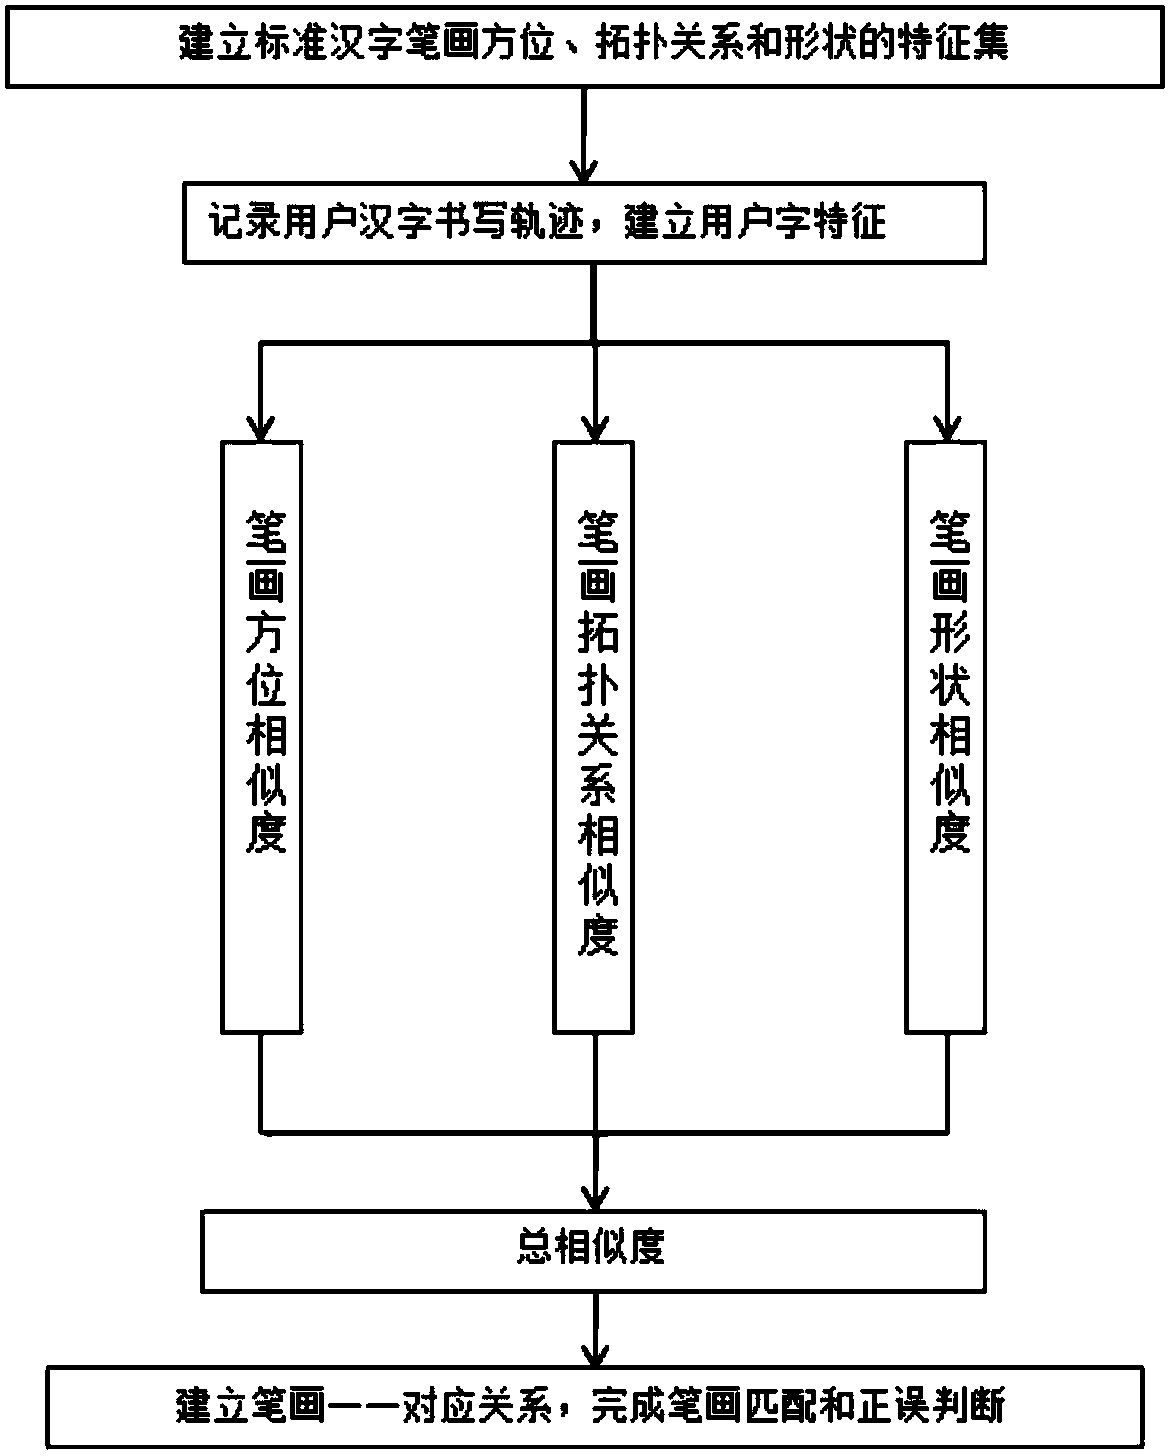 Handwritten Chinese character stroke confirmation method for carrying out similarity matching on the basis of characteristic matrix